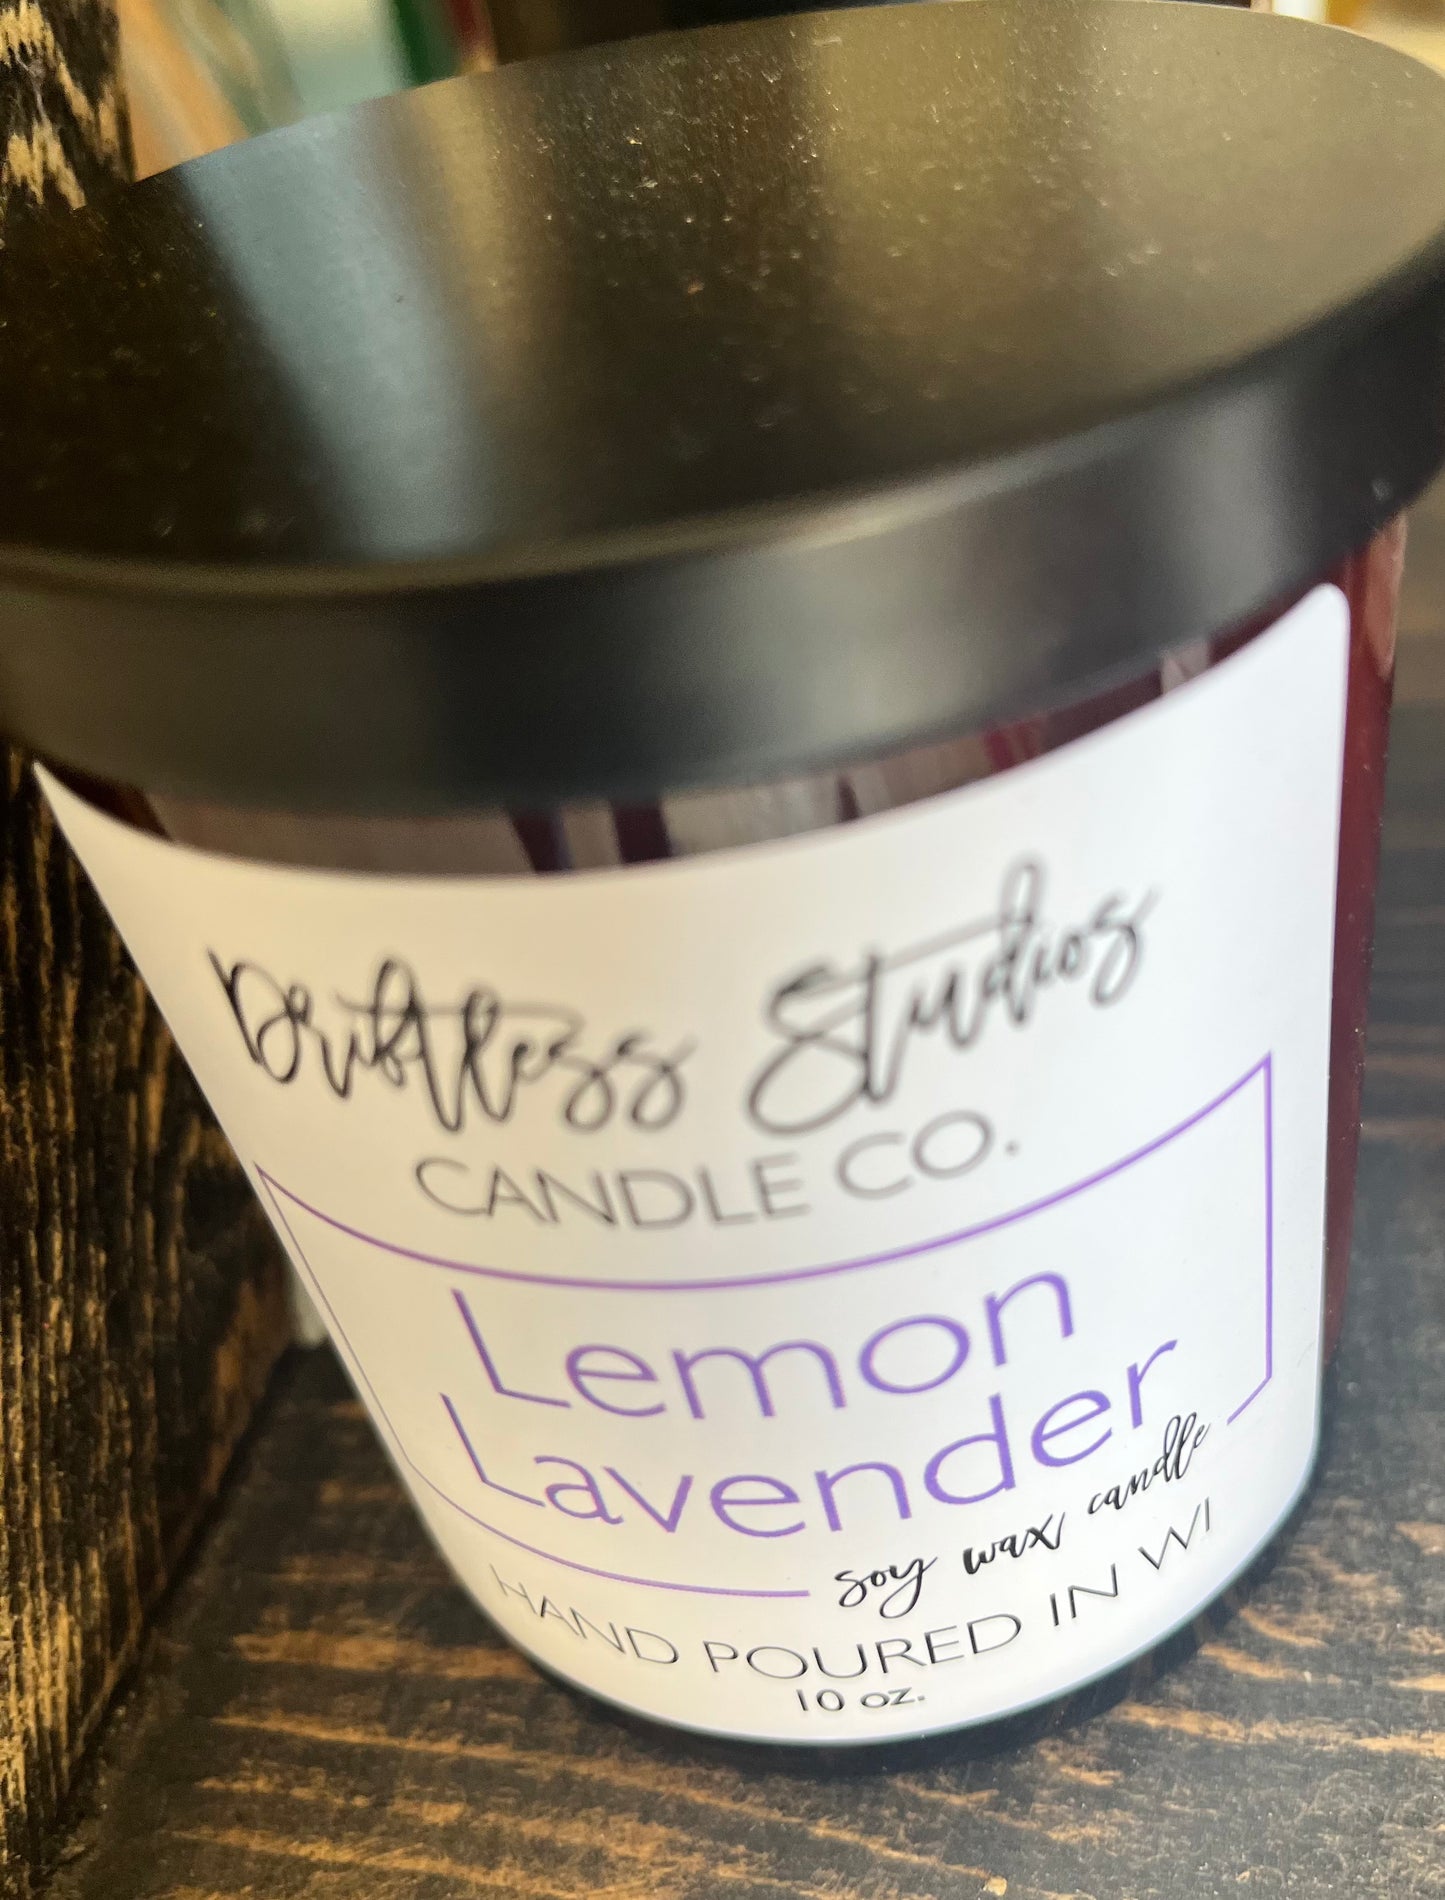 Driftless Studios Candle Co